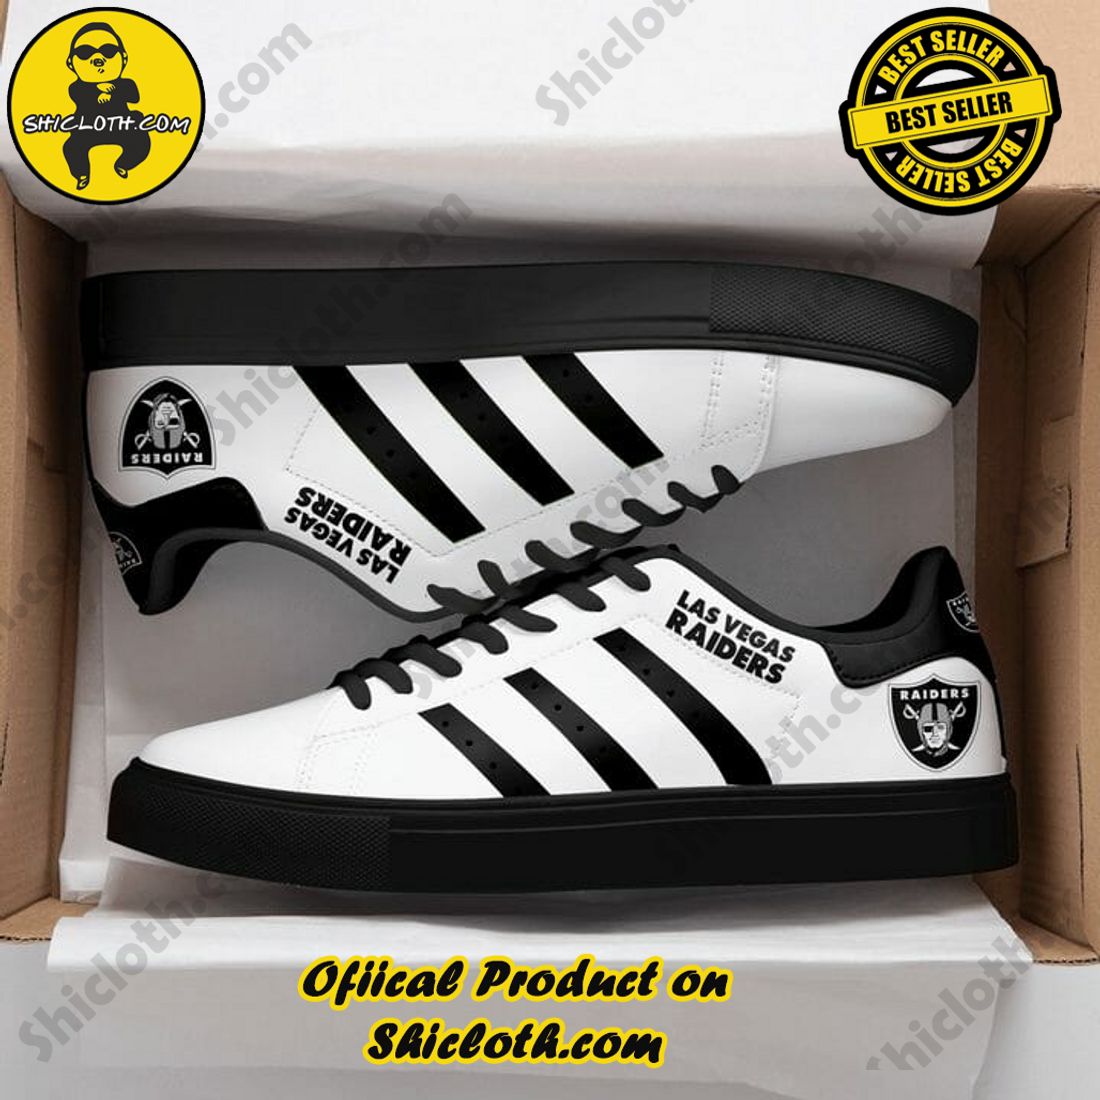 Shop - Page 4 of 219 - NFL STORE  Skate shoes, Adidas shoes stan